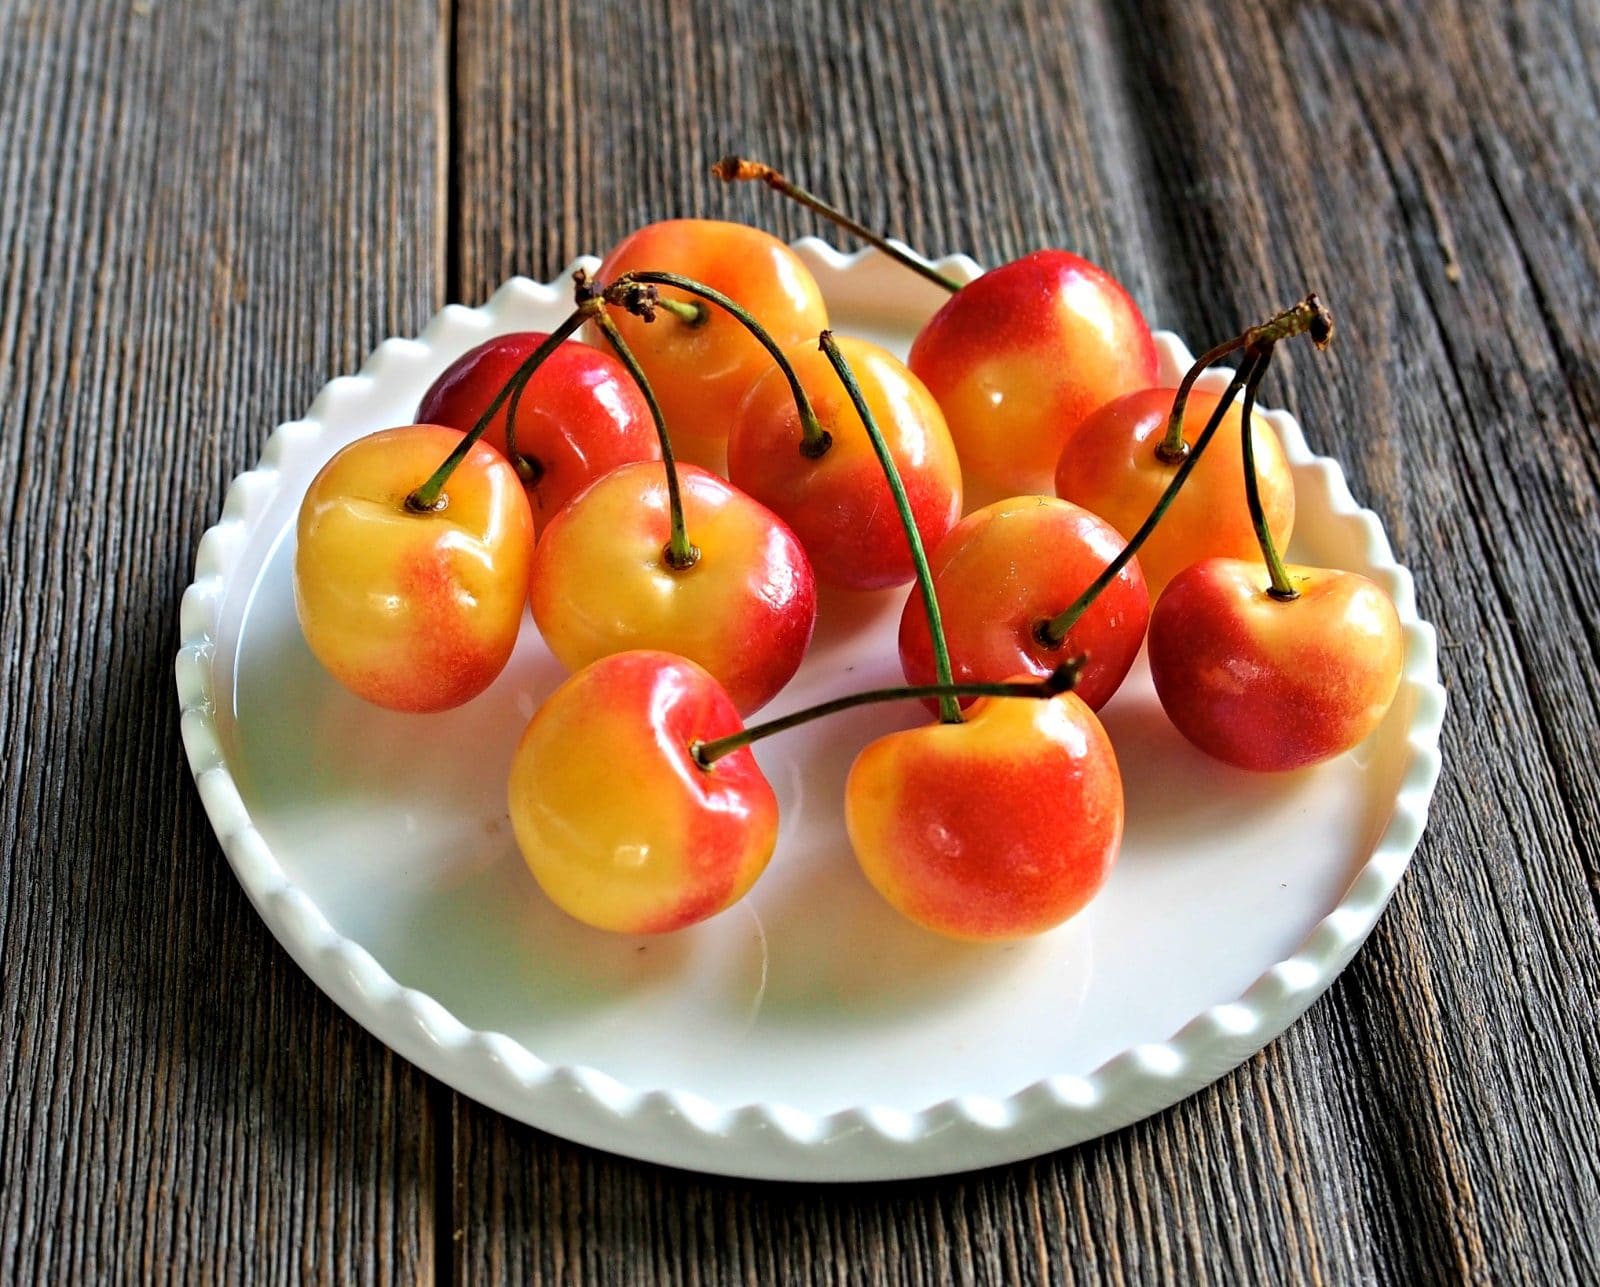 Rainier Cherry Pie Bites -deconstructed cherry pie bites. Sweet, juicy, cinnamon-y, lovely bites made with uncooked cherries & drizzled with almond honey. Simply Sated